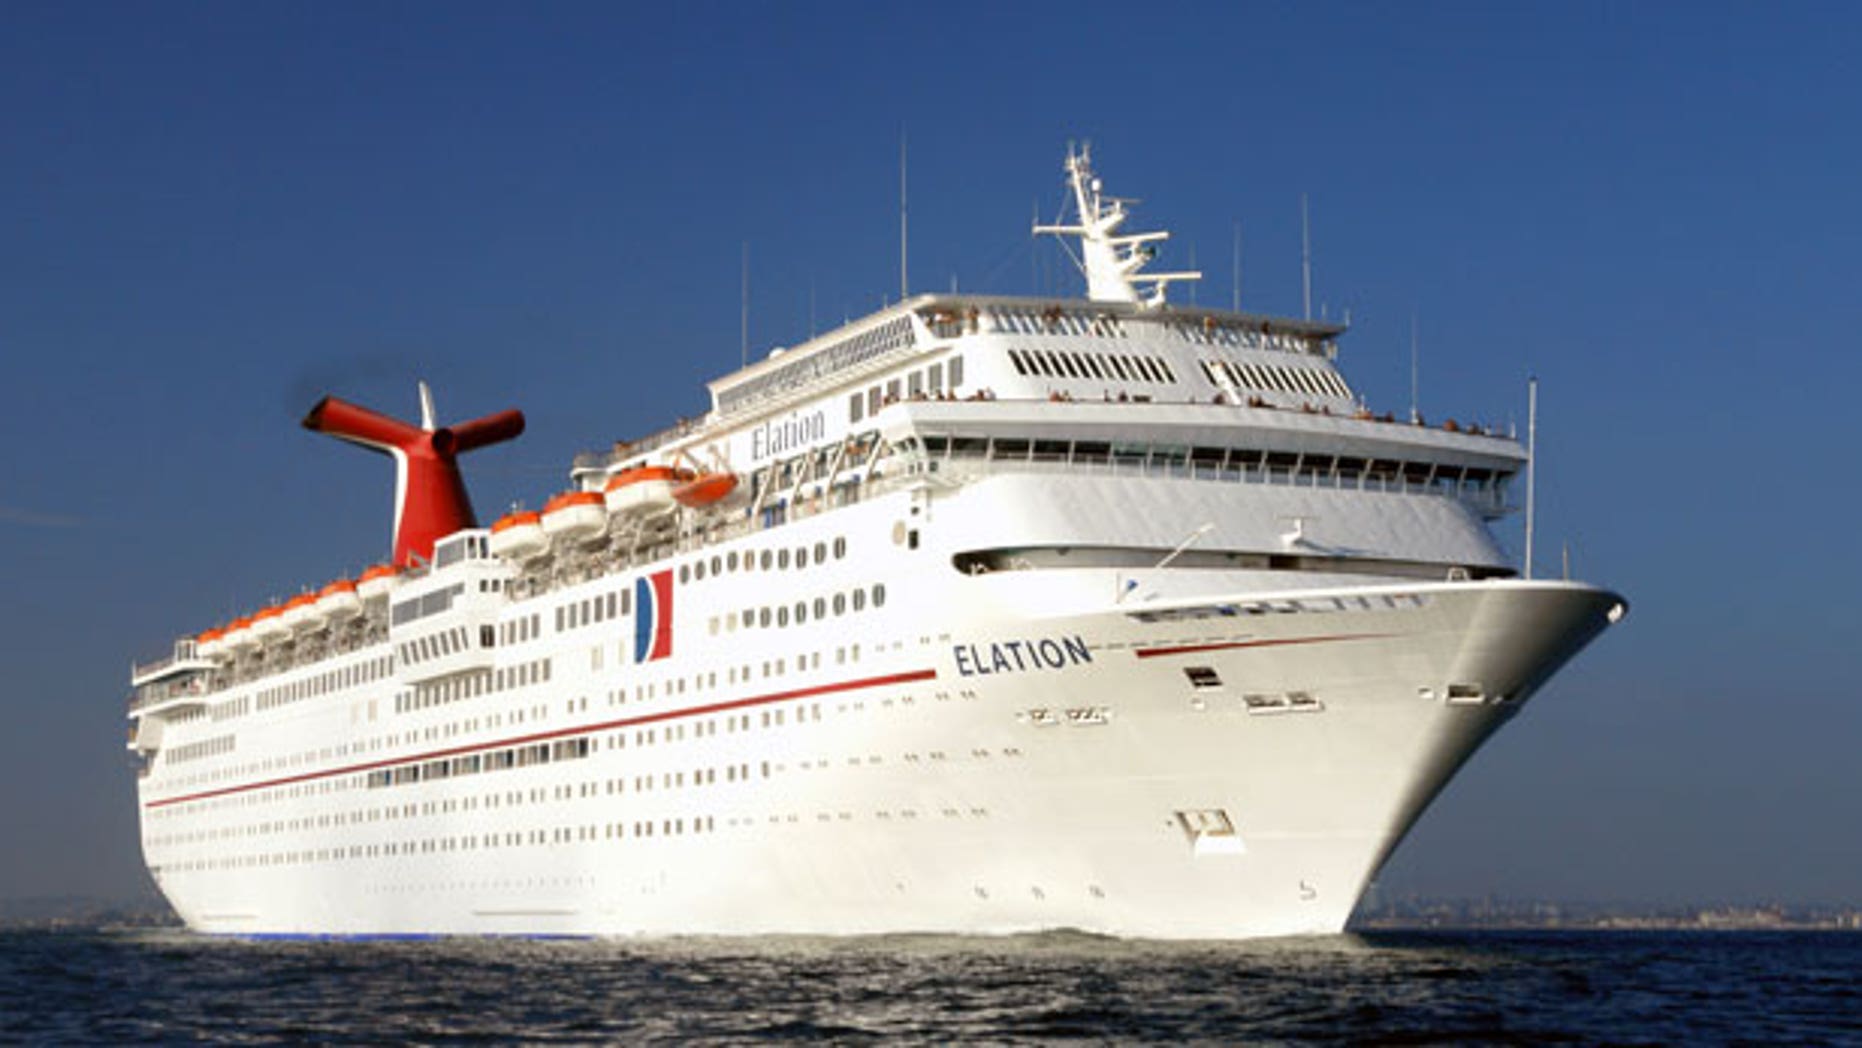 A Woman Fell To Her On Carnival Cruise Line Ship That Was Sailing